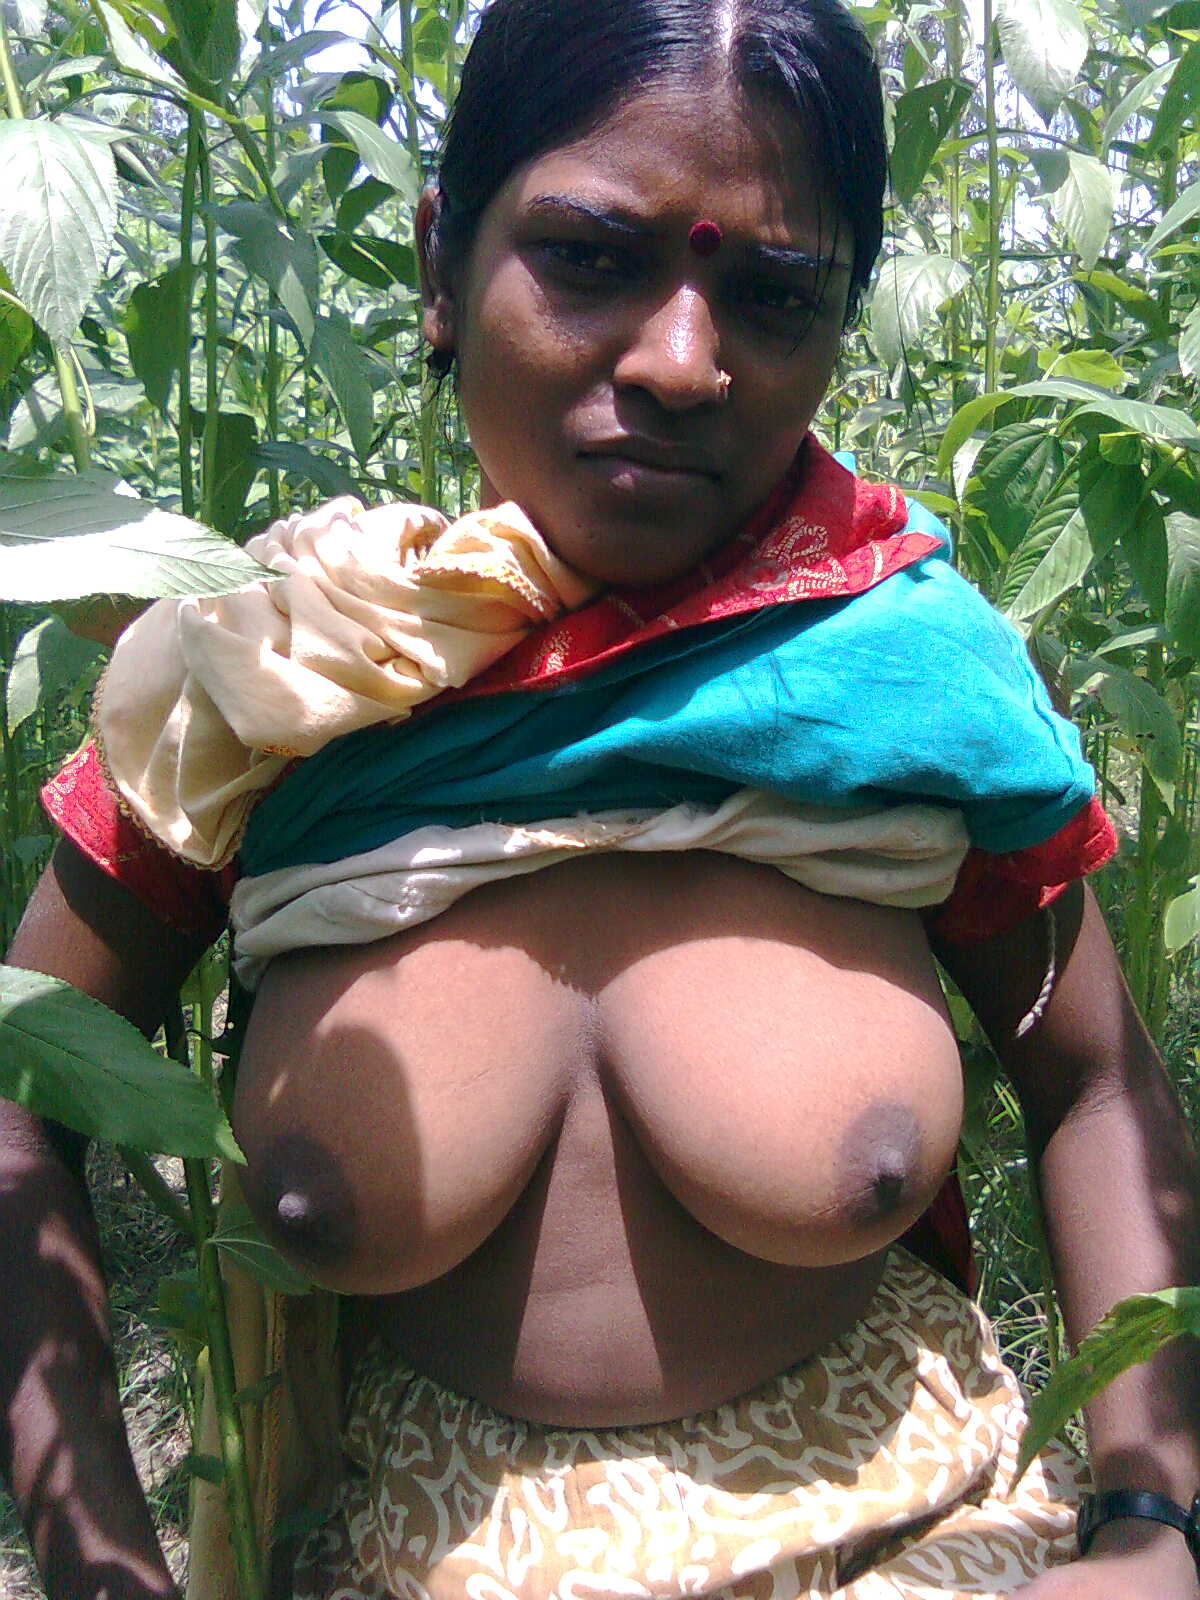 Tamil nude - ЁЯзб South Tamil Nude Hot - Telegraph.